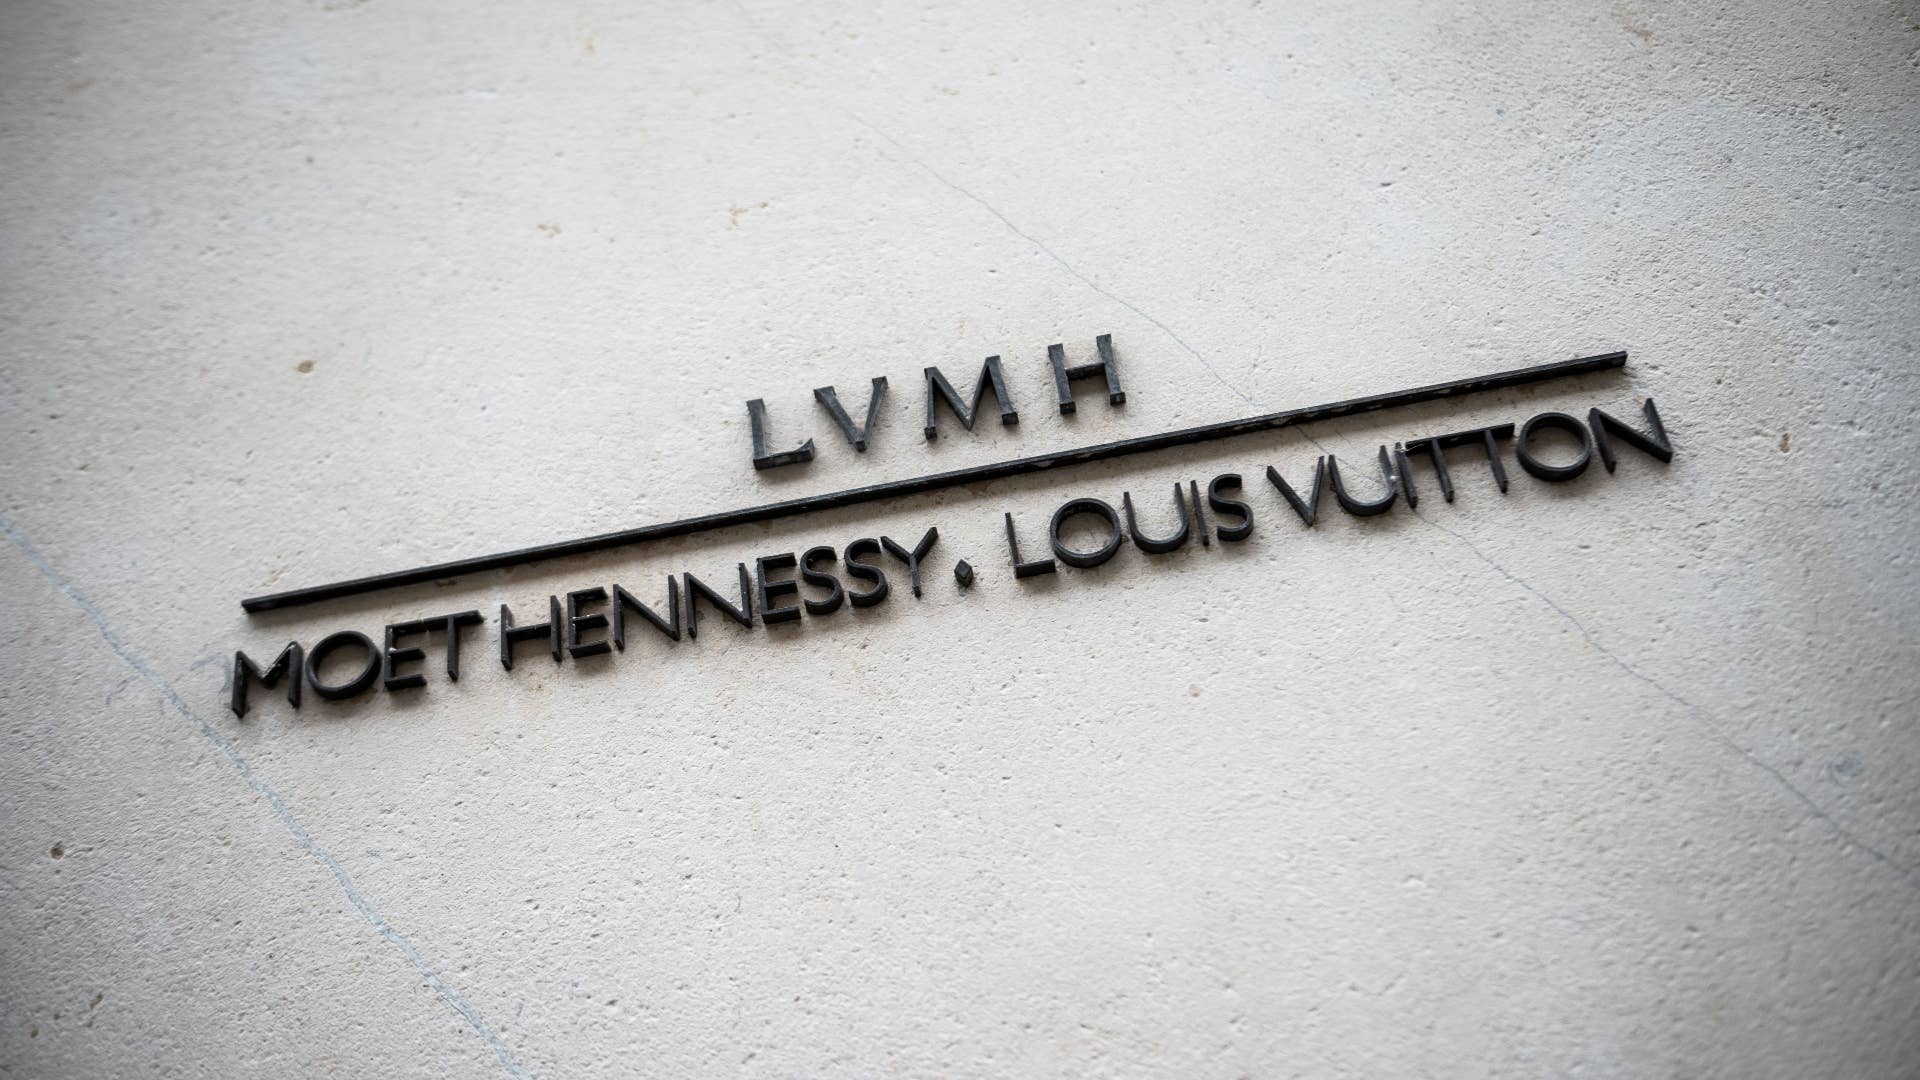 A building logo for LVMH is shown